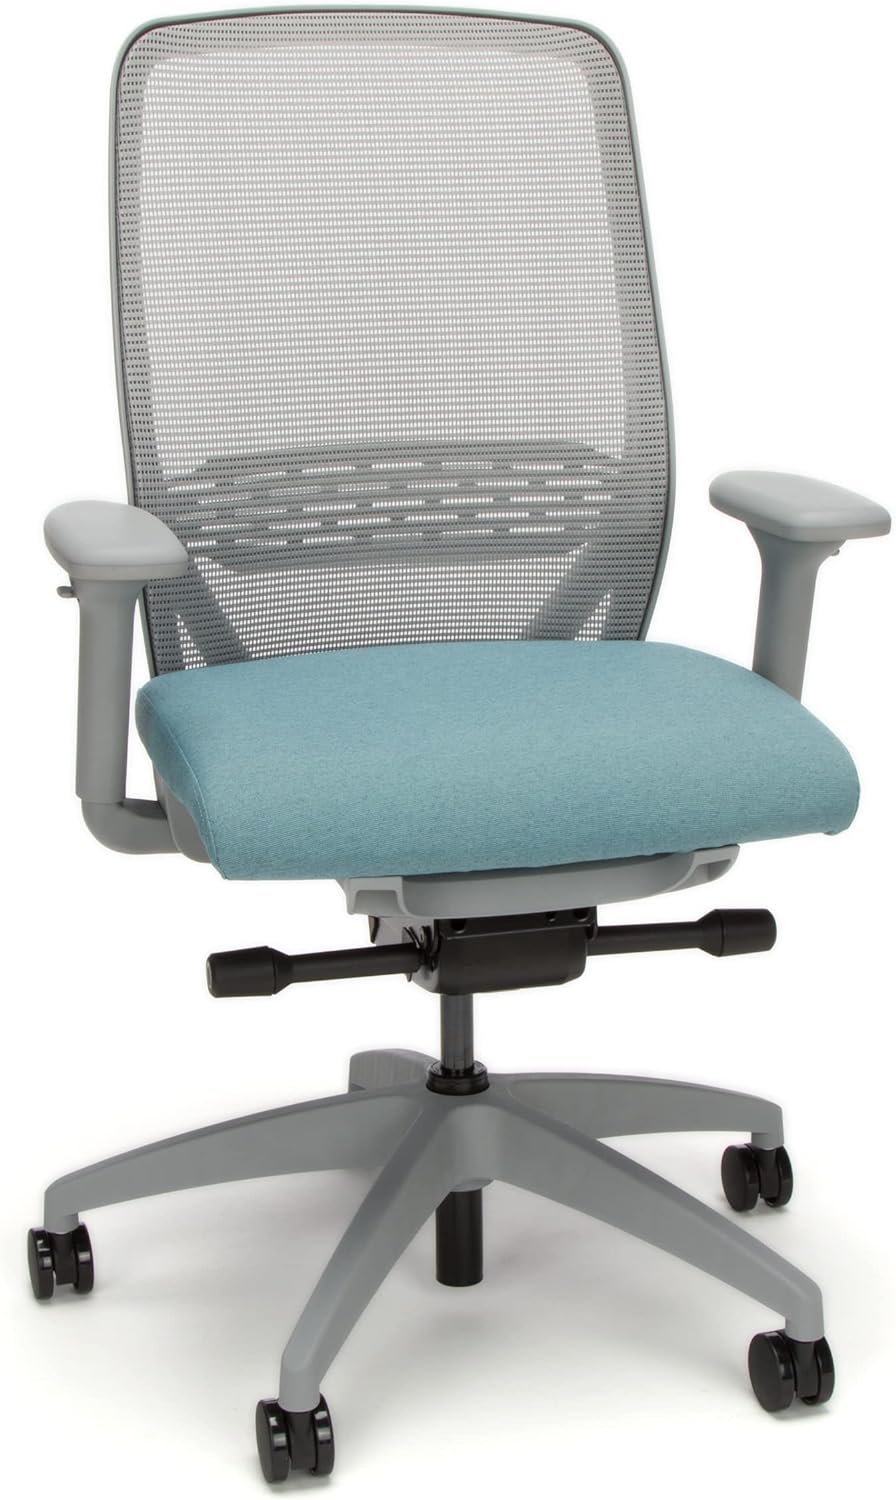 HON Nucleus Recharged Grey Office Chair Ergonomic Suspended Seat Mesh Back Computer Desk Chair for Home Office, Task Work - Synchro-Tilt Recline, Swivel Wheels, Adjustable Lumbar Support & Armrests